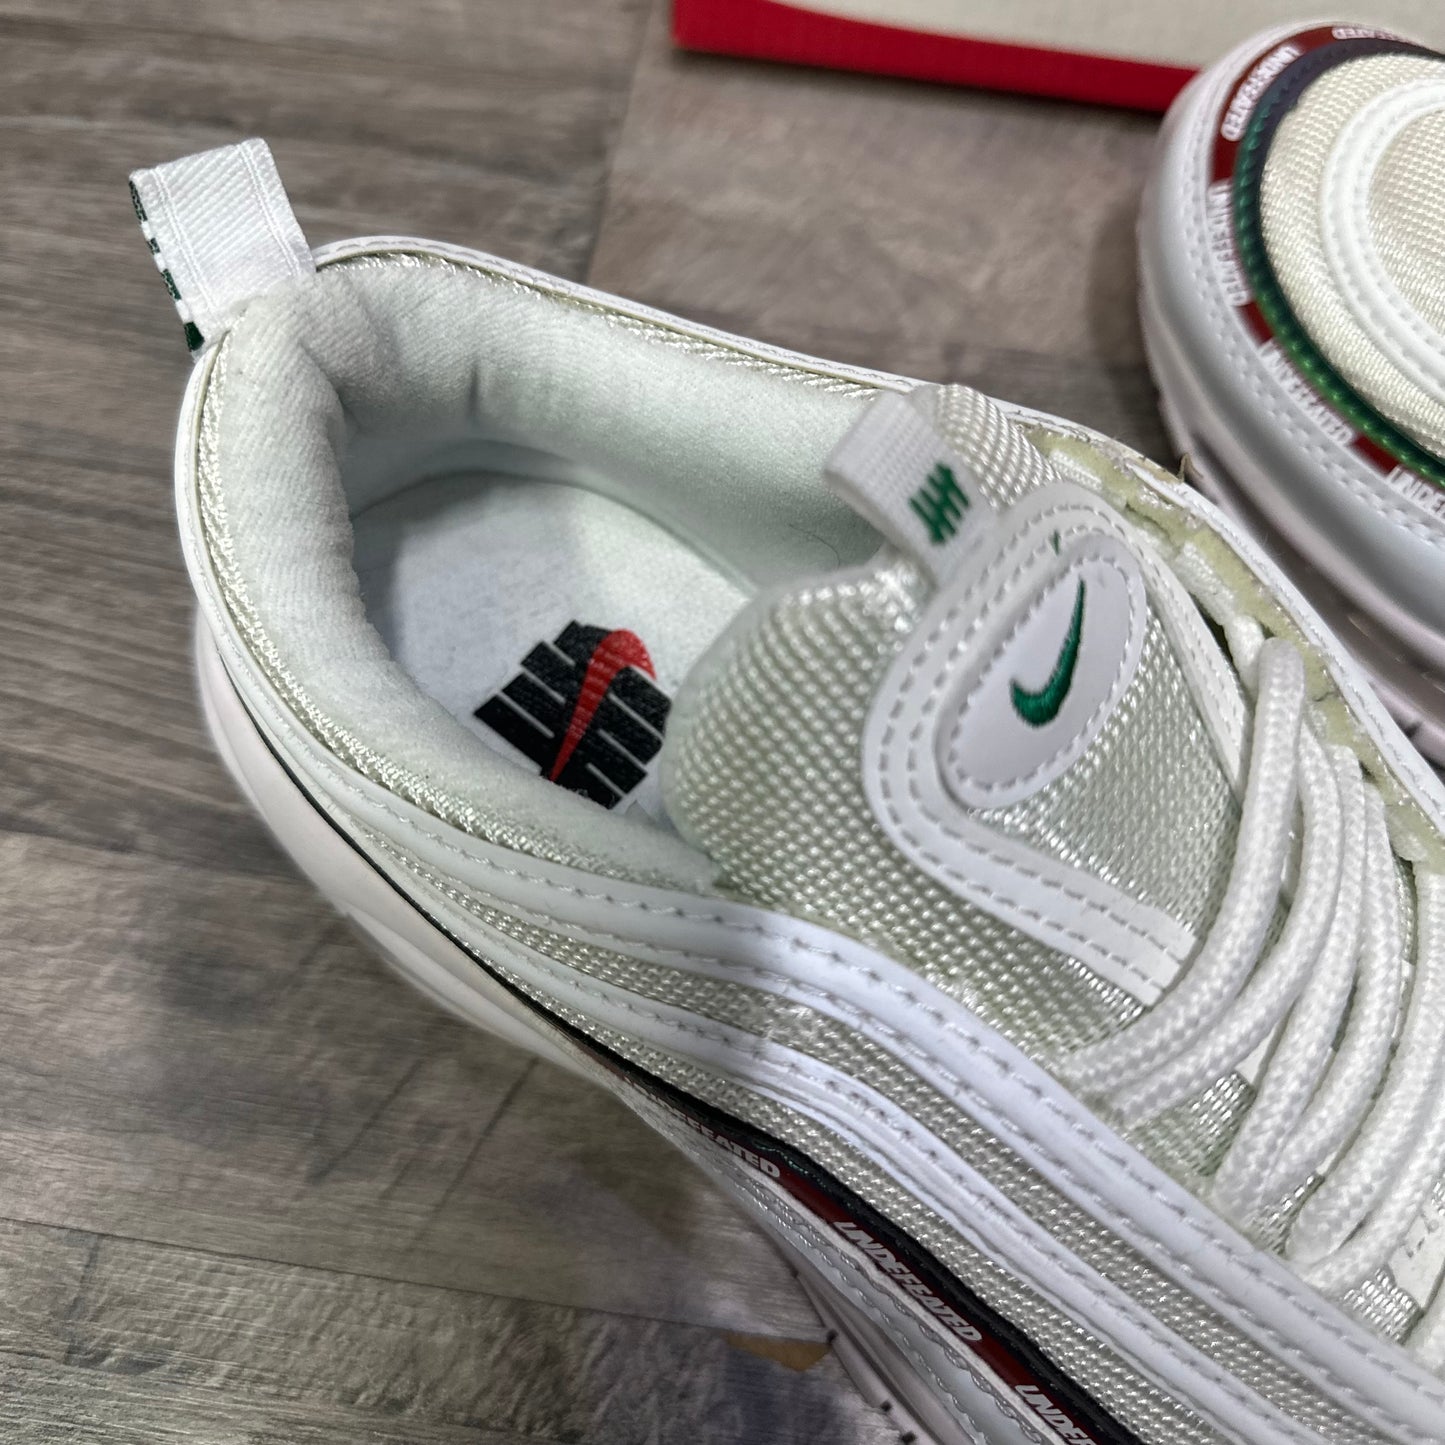 Air Max 97 White - Undefeated